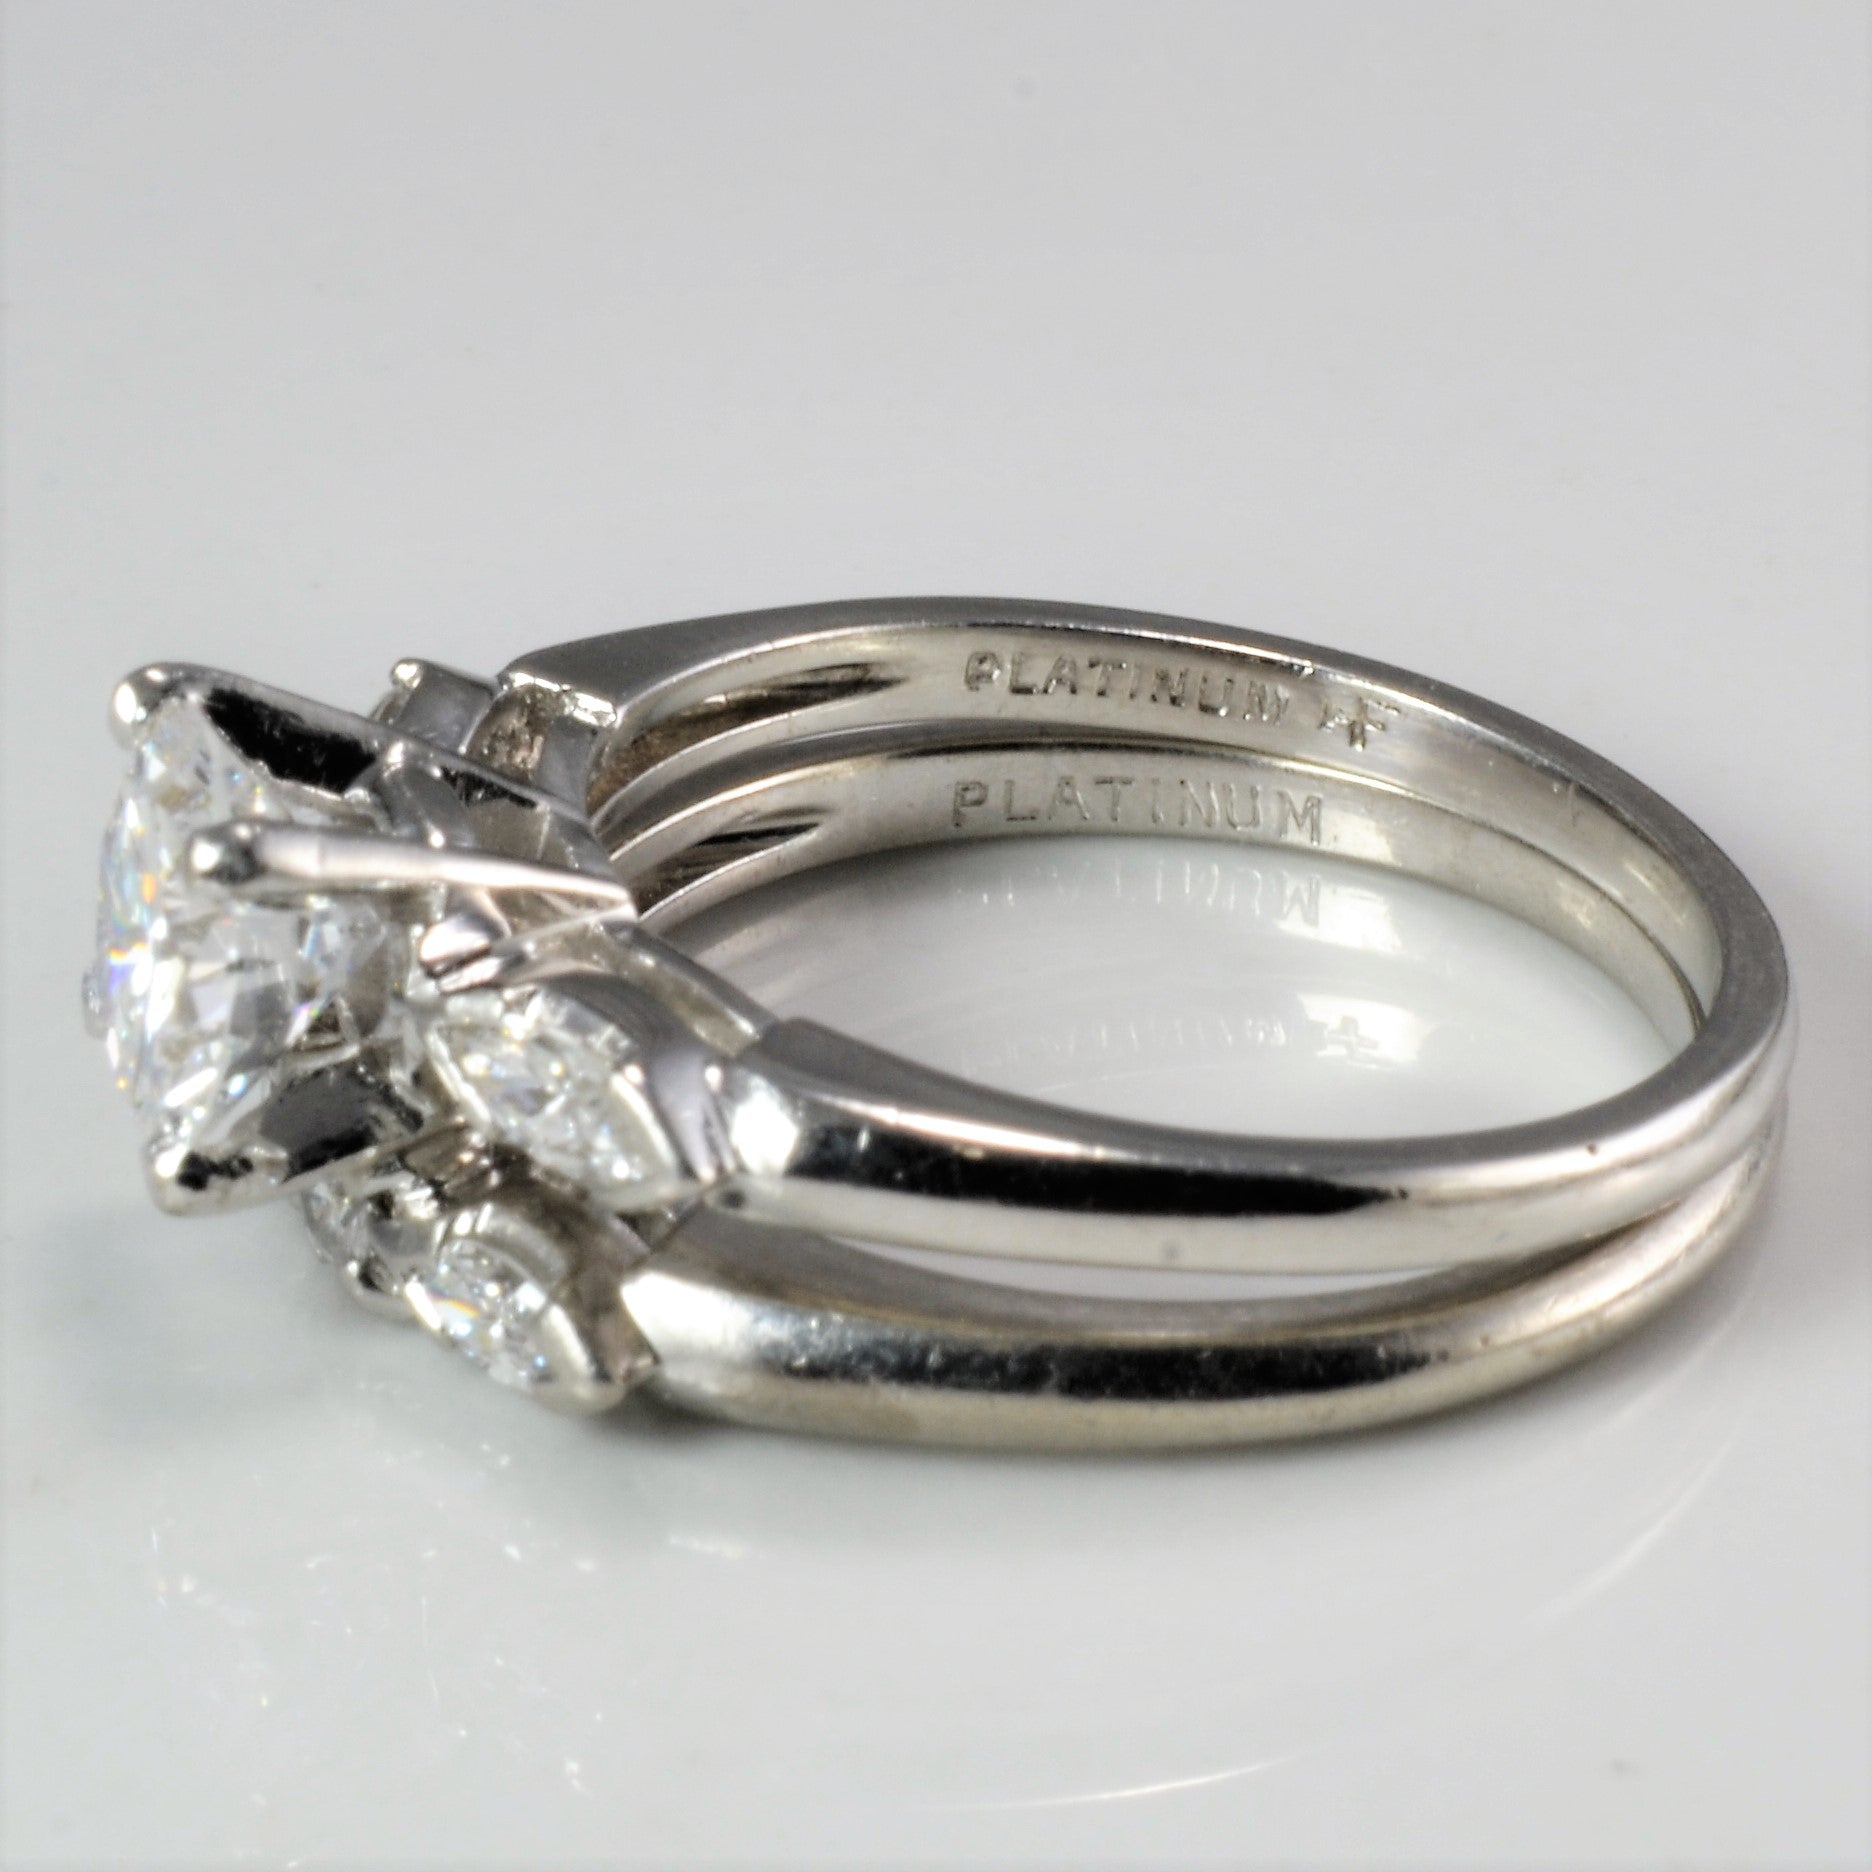 High Set Solitaire with Accents Diamond Engagement Ring Set | 1.24 ctw, SZ 6.25 |